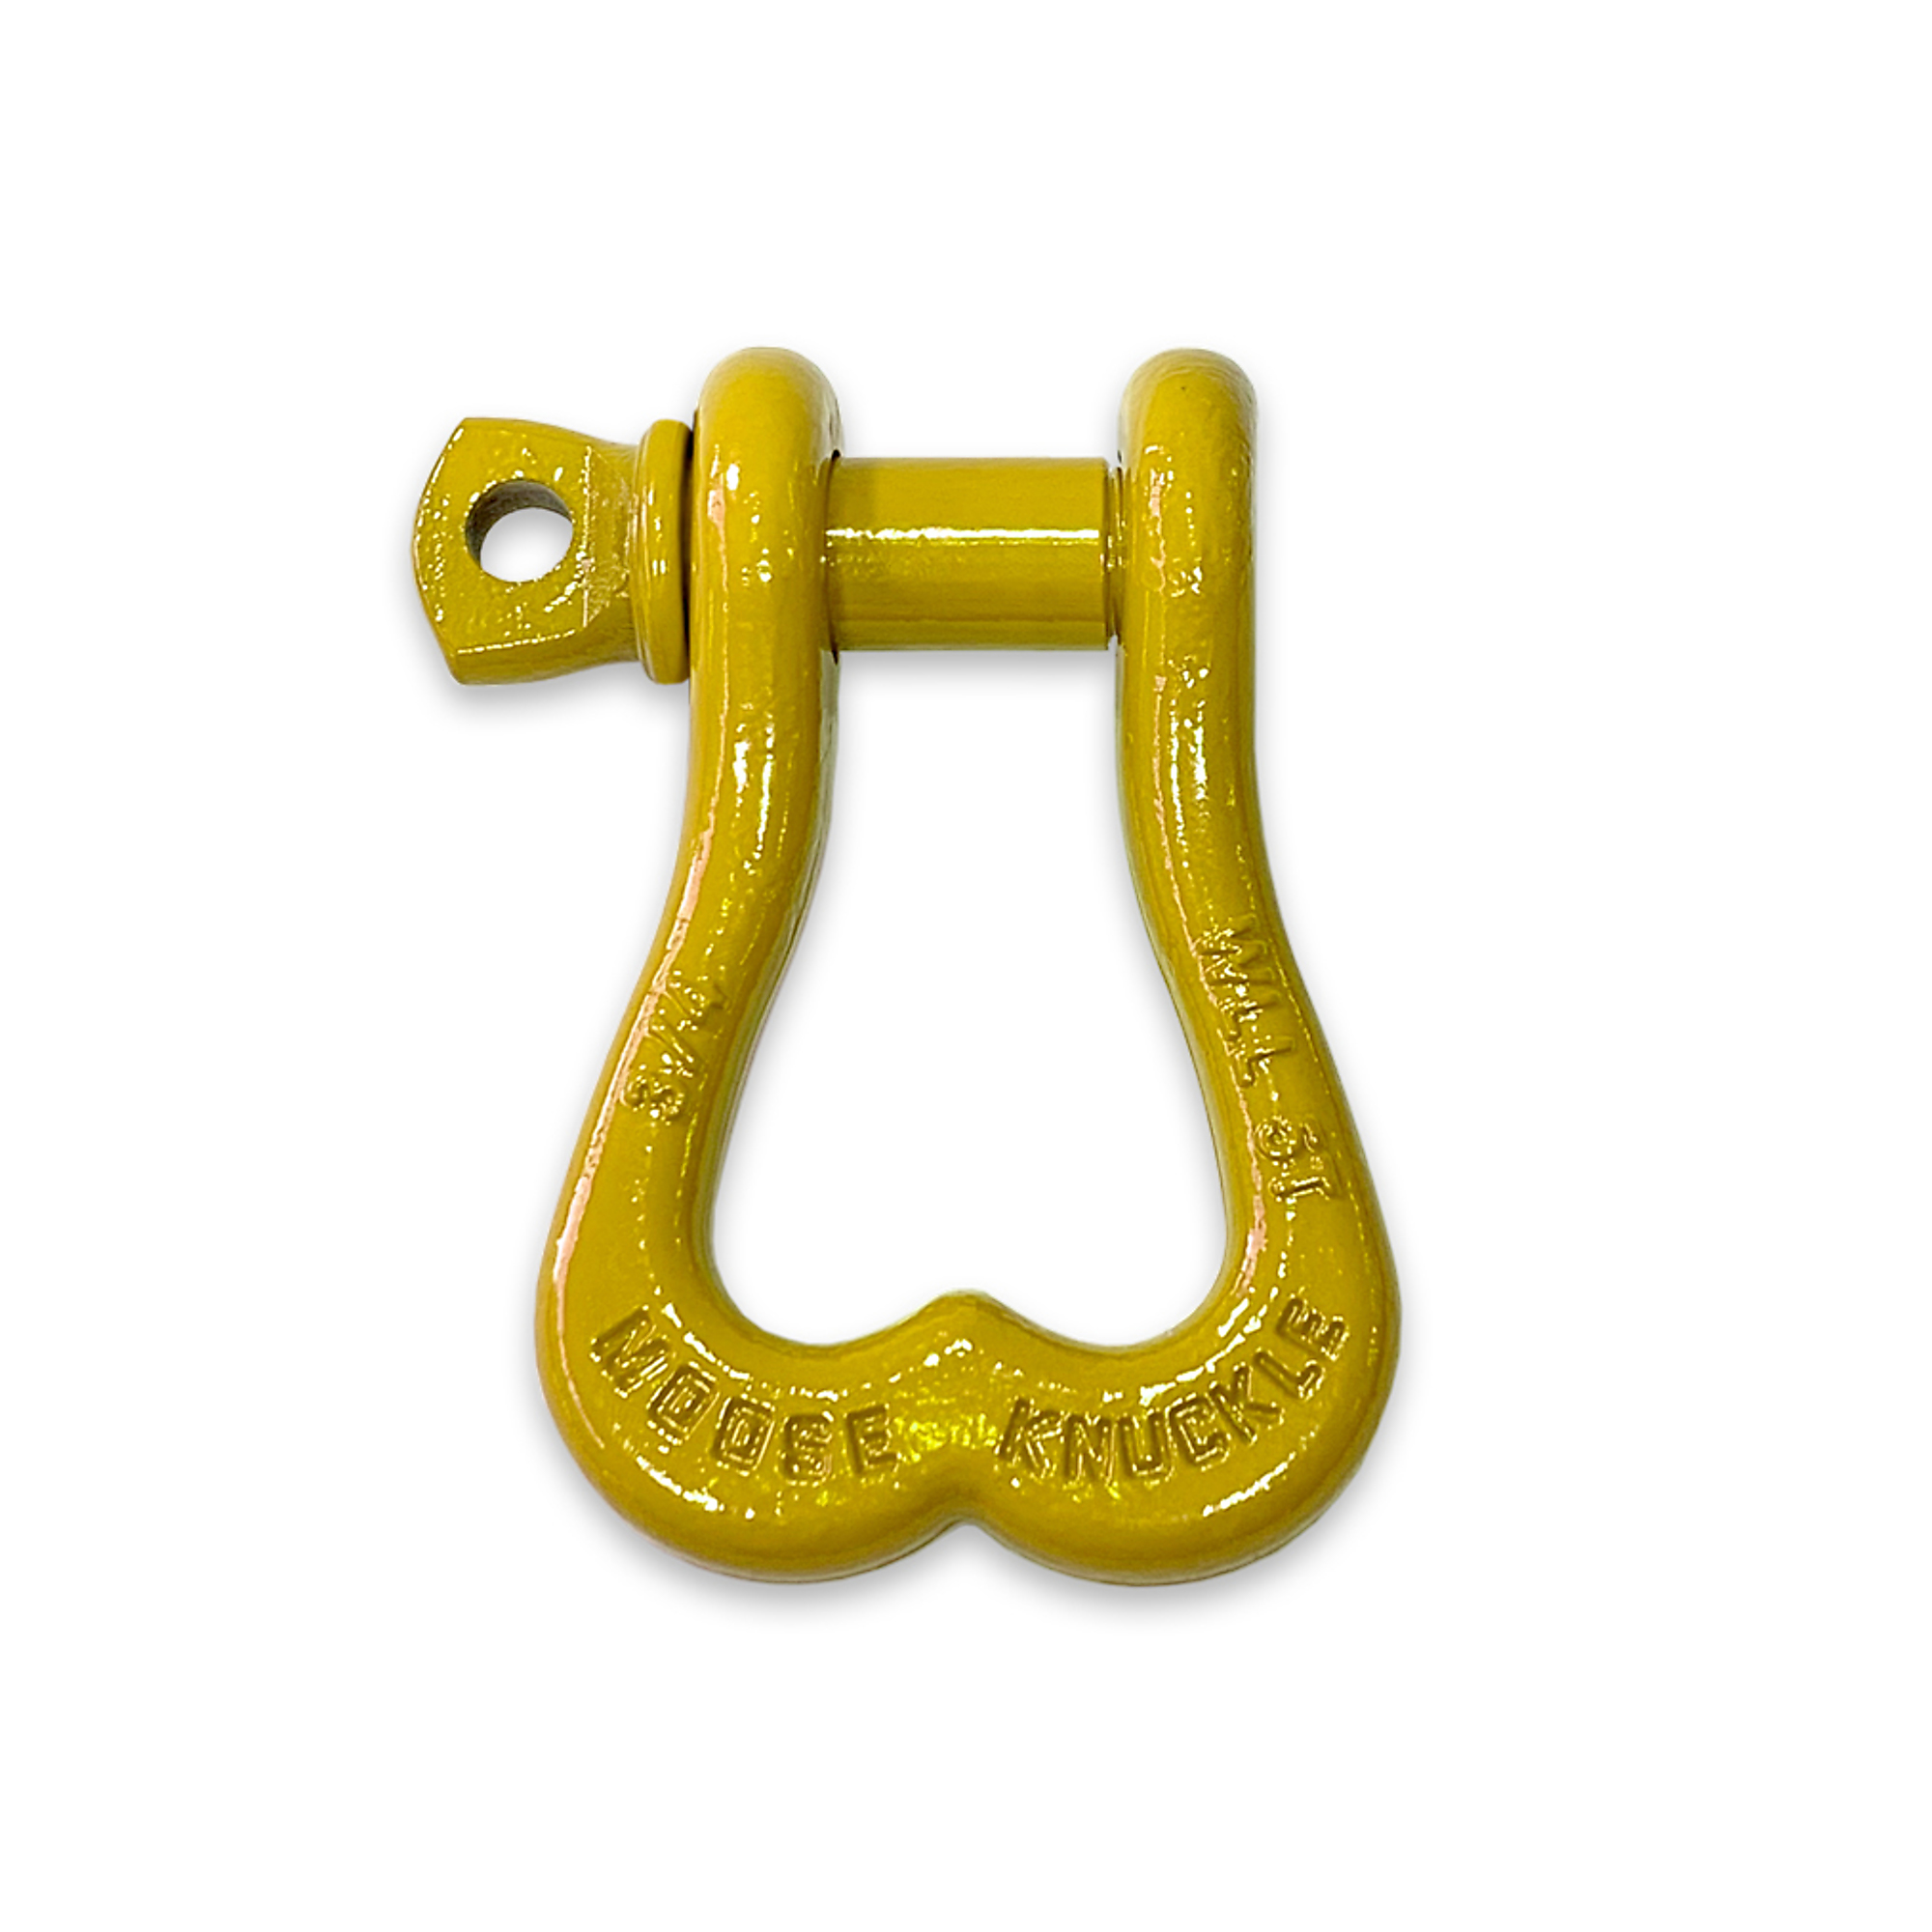 Moose Knuckle Offroad, Detonator Yellow 3/4Inch Recovery Towing Shackle, Working Load Limit 10000 lb, Model FN000001-005